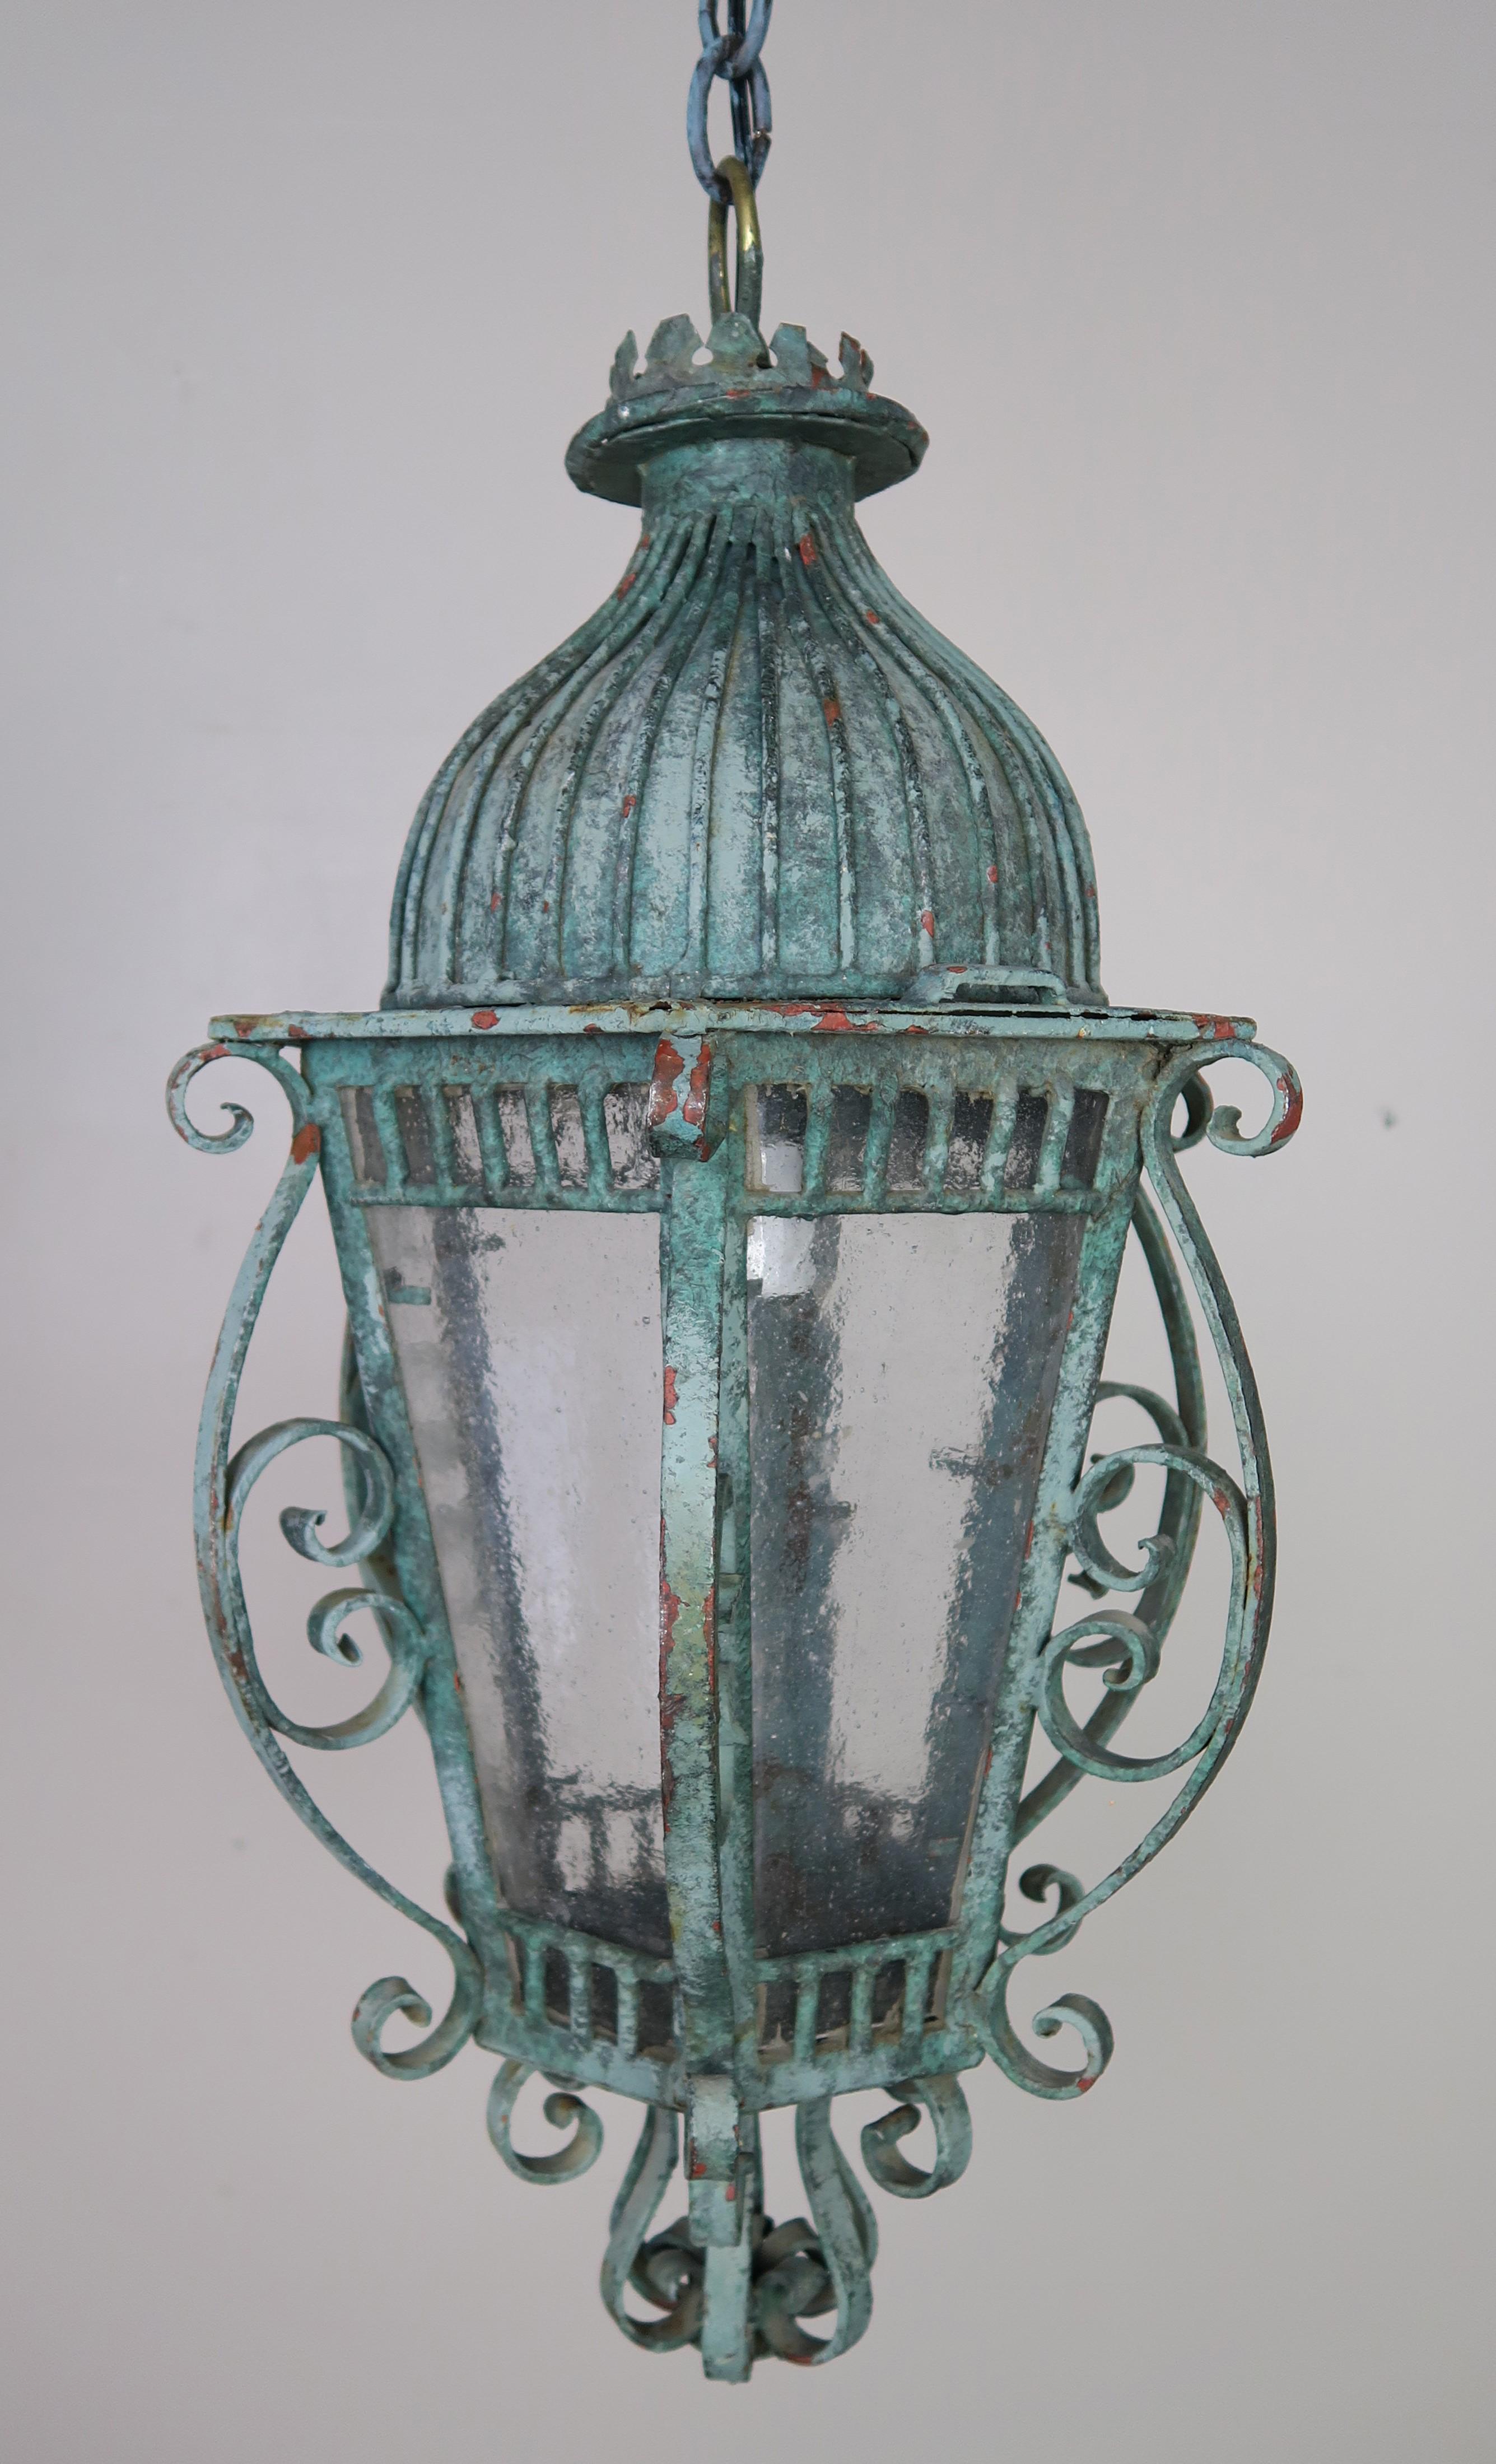 French wrought iron painted dome top lantern in a soft green coloration. The paint is beautifully worn from years of use. This six sided fixture has soft pebbled textured glass. The lantern is newly rewired and includes chain and canopy. It is ready